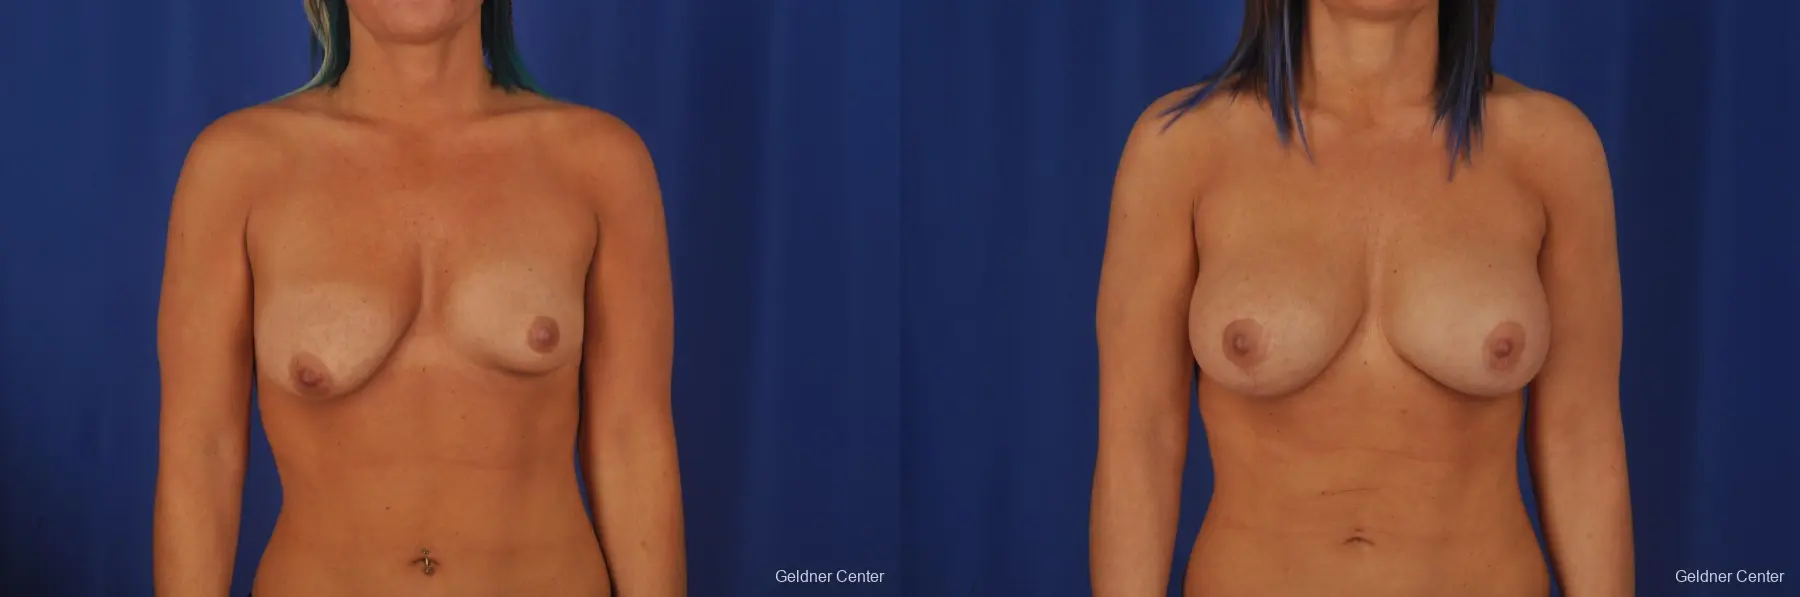 Breast Lift Lake Shore Dr, Chicago 2337 - Before and After